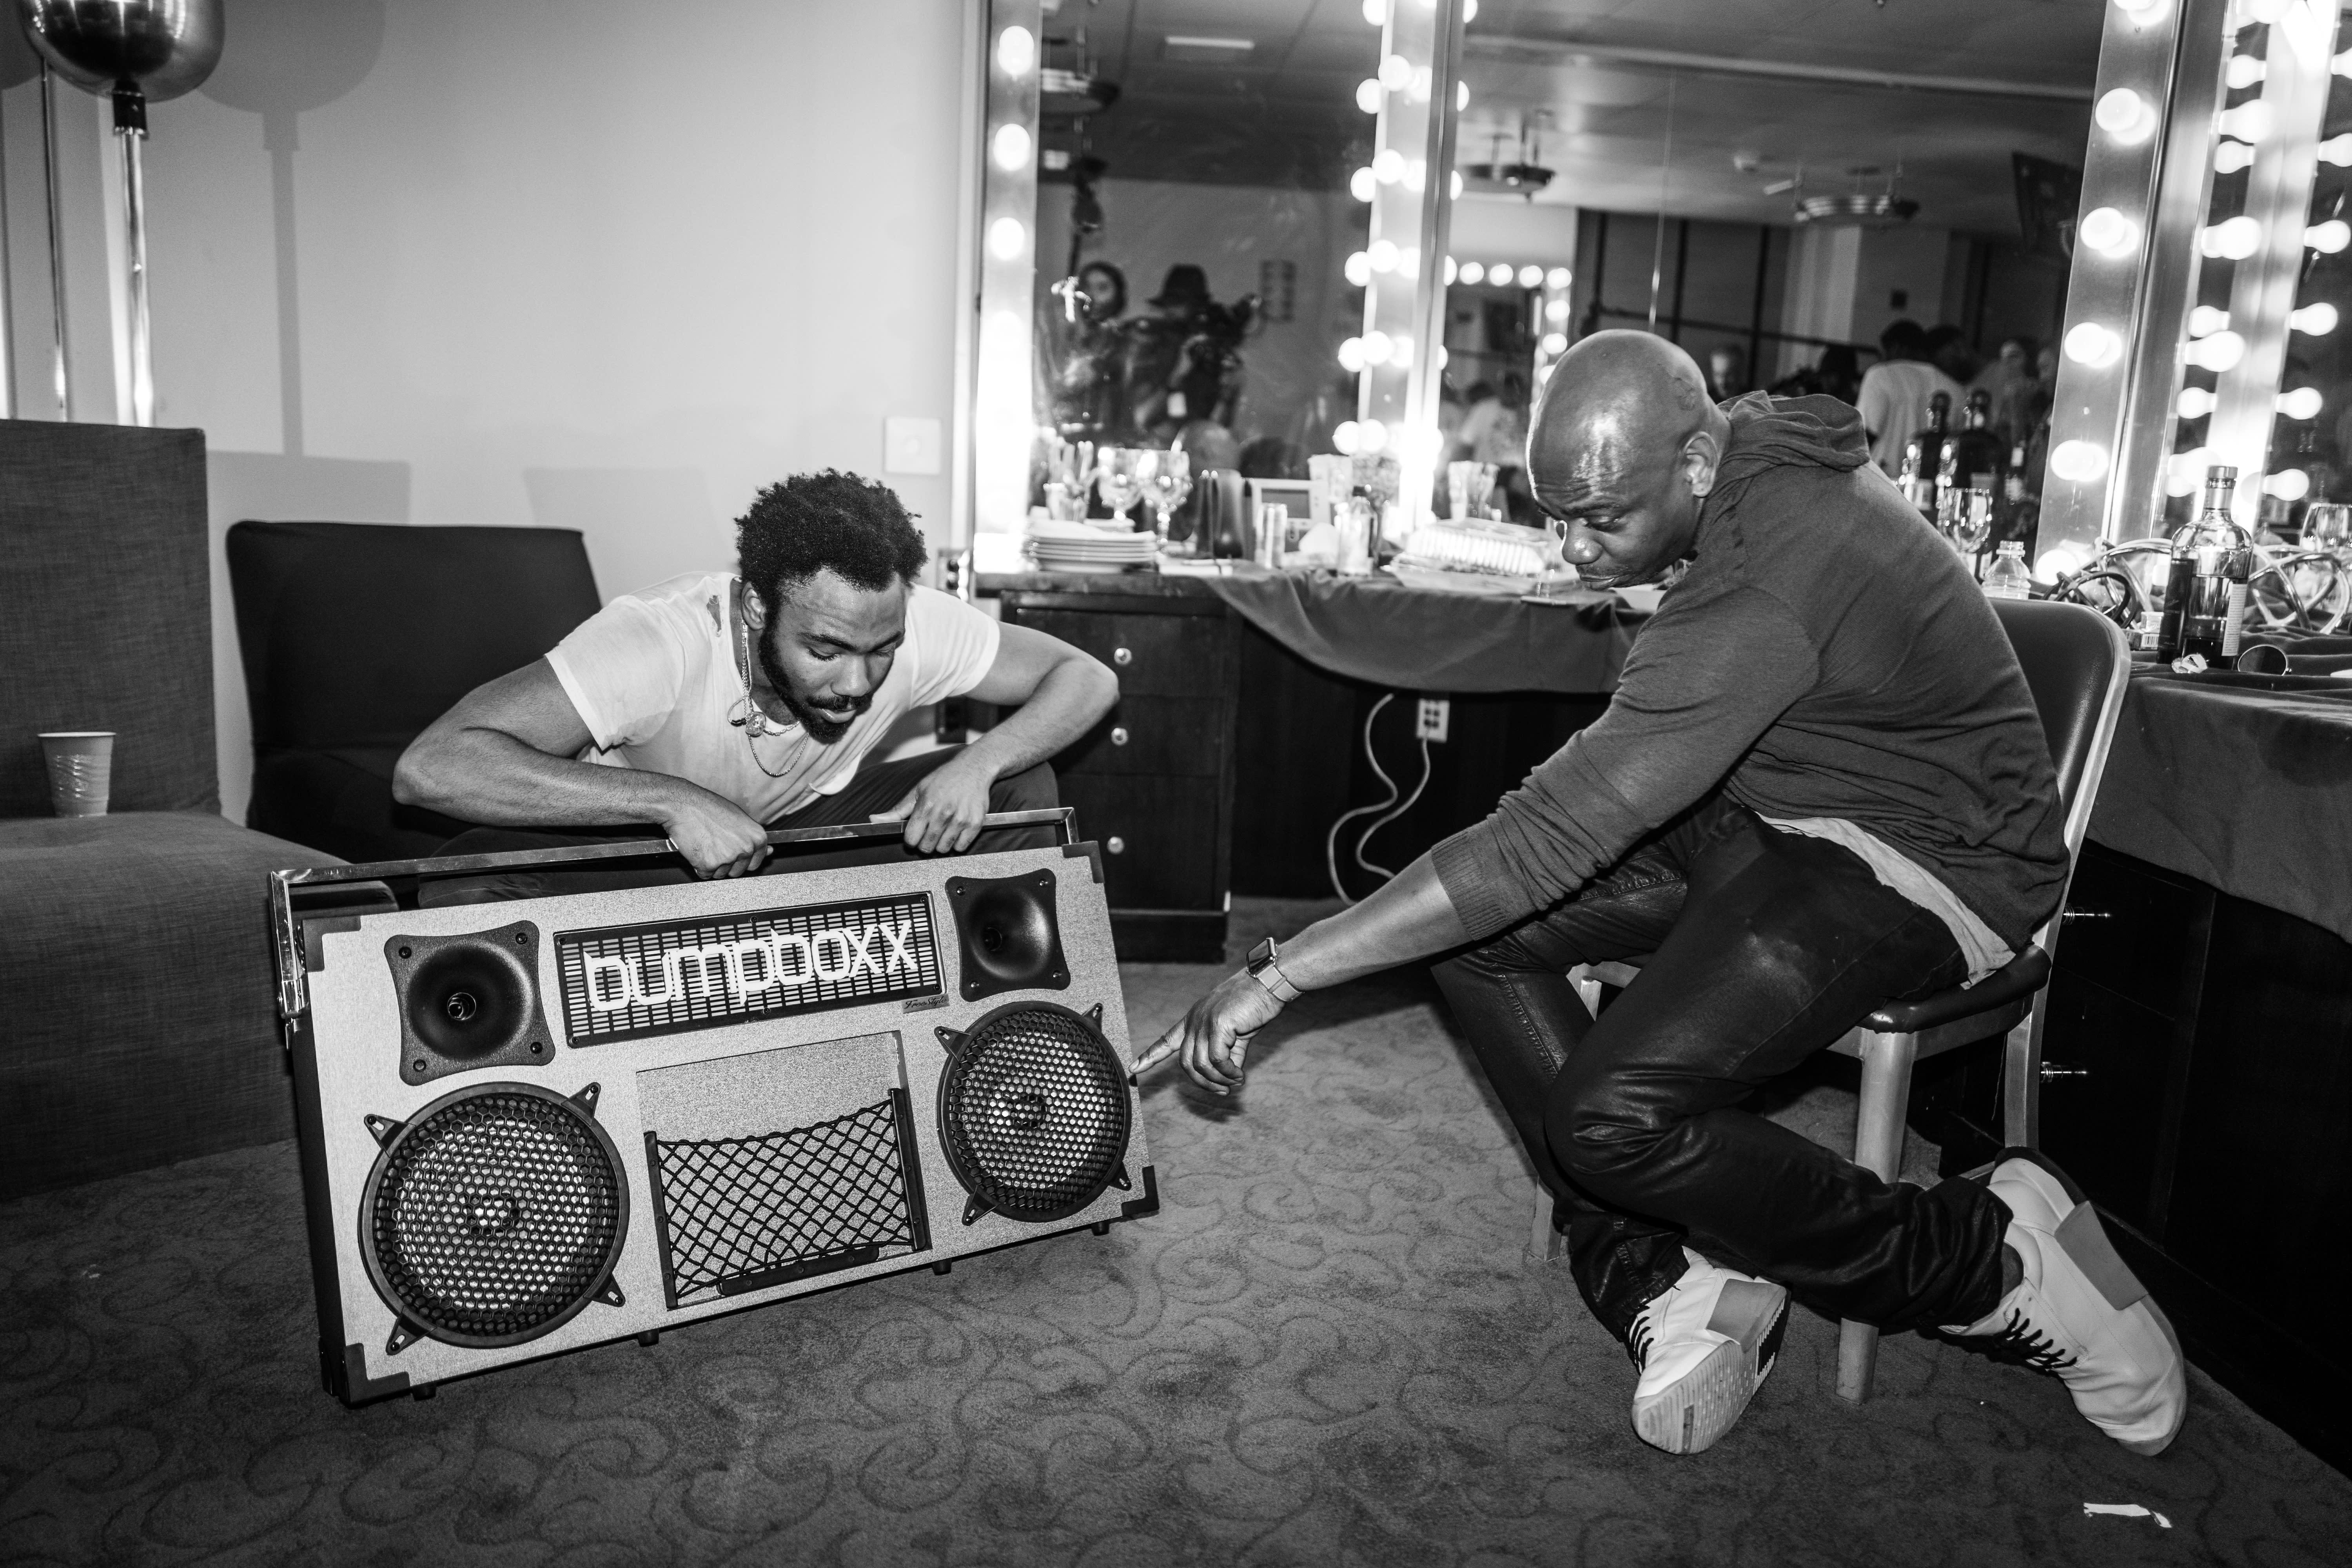 Dave Chappelle with multi-hyphenate artist Donald Glover backstage at Radio City Music Hall